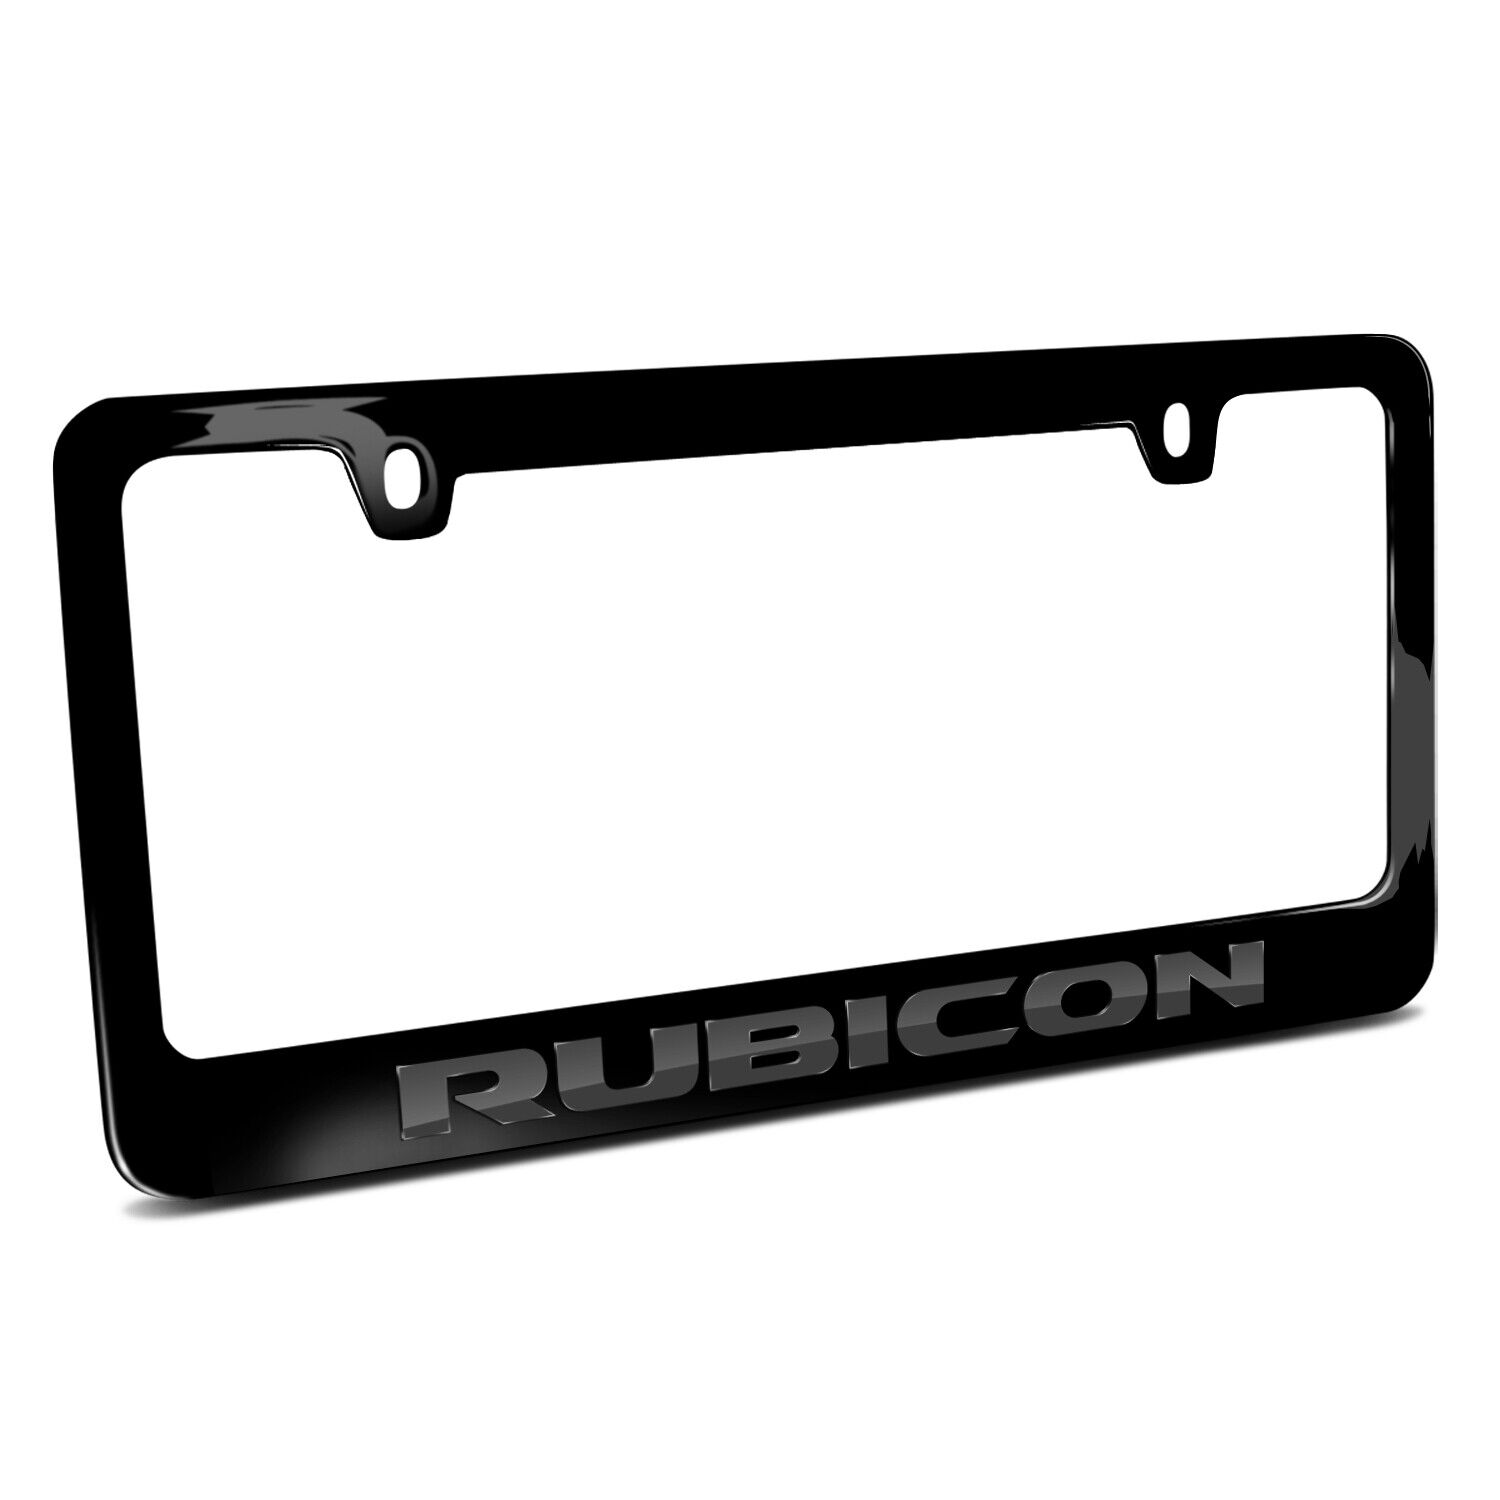 Jeep Rubicon in 3D Dark Gray Letters on Black Metal License Plate Frame